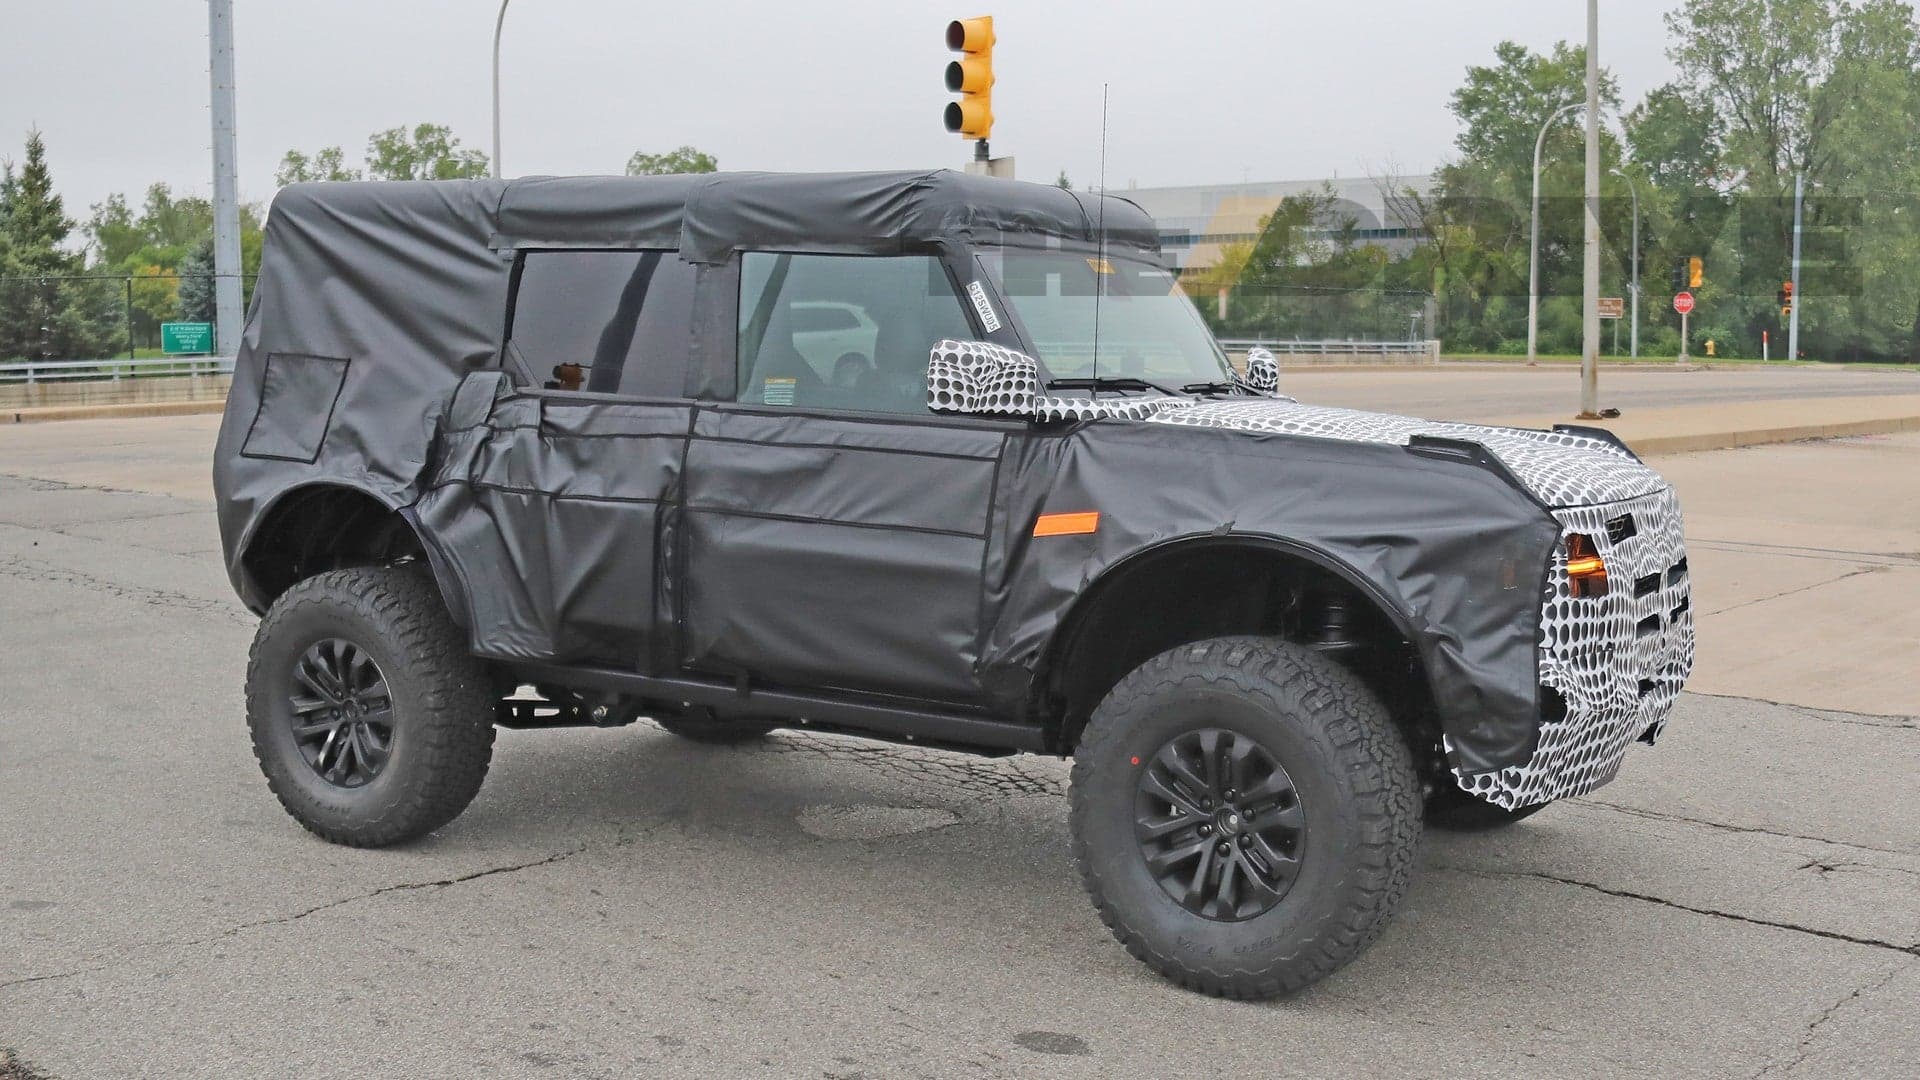 Here’s the Amped-Up Ford Bronco Raptor Out Testing In the Wild